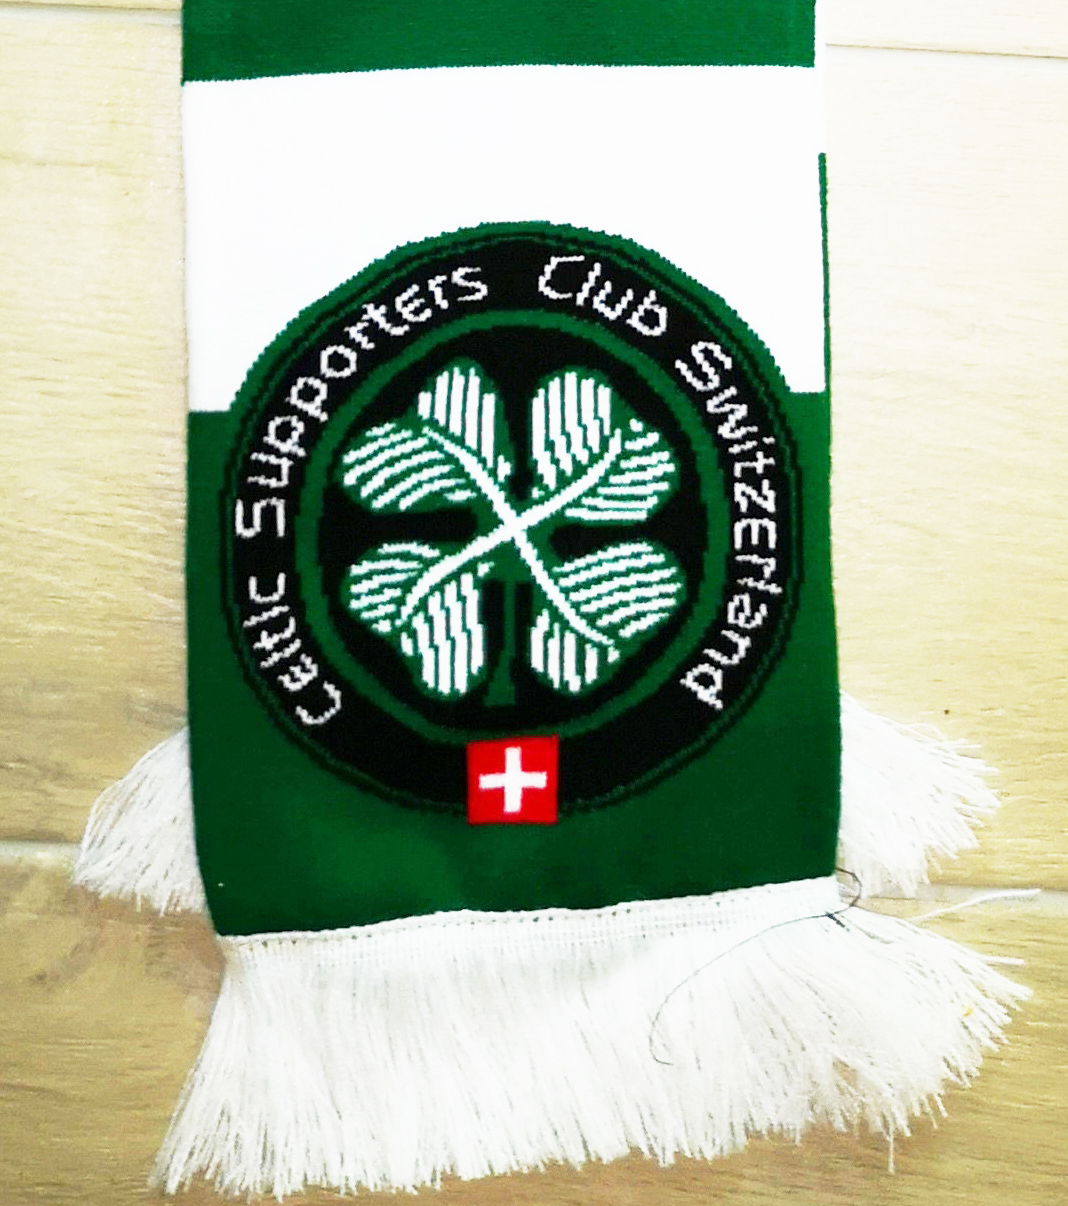 ﻿CSC Switzerland scarves now available!